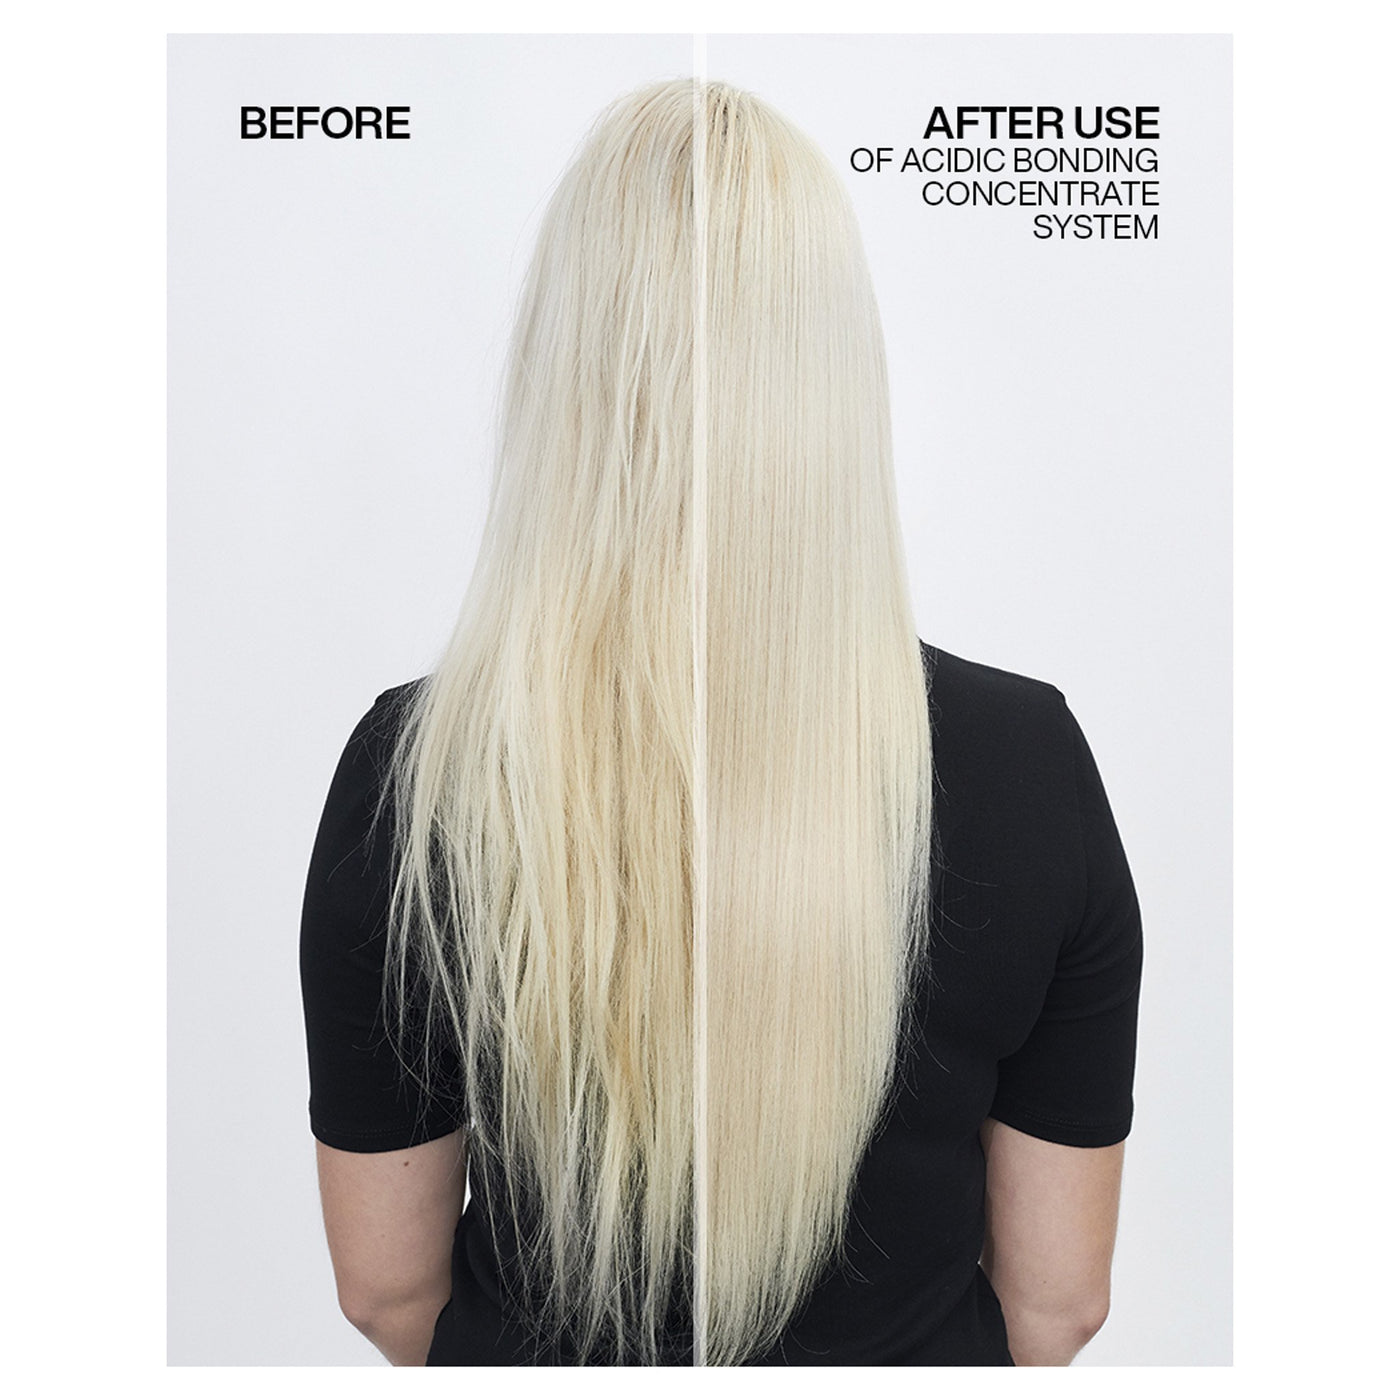 Redken Acidic Bonding Concentrate Shampoo (1000ml) before and after use on blonde hair